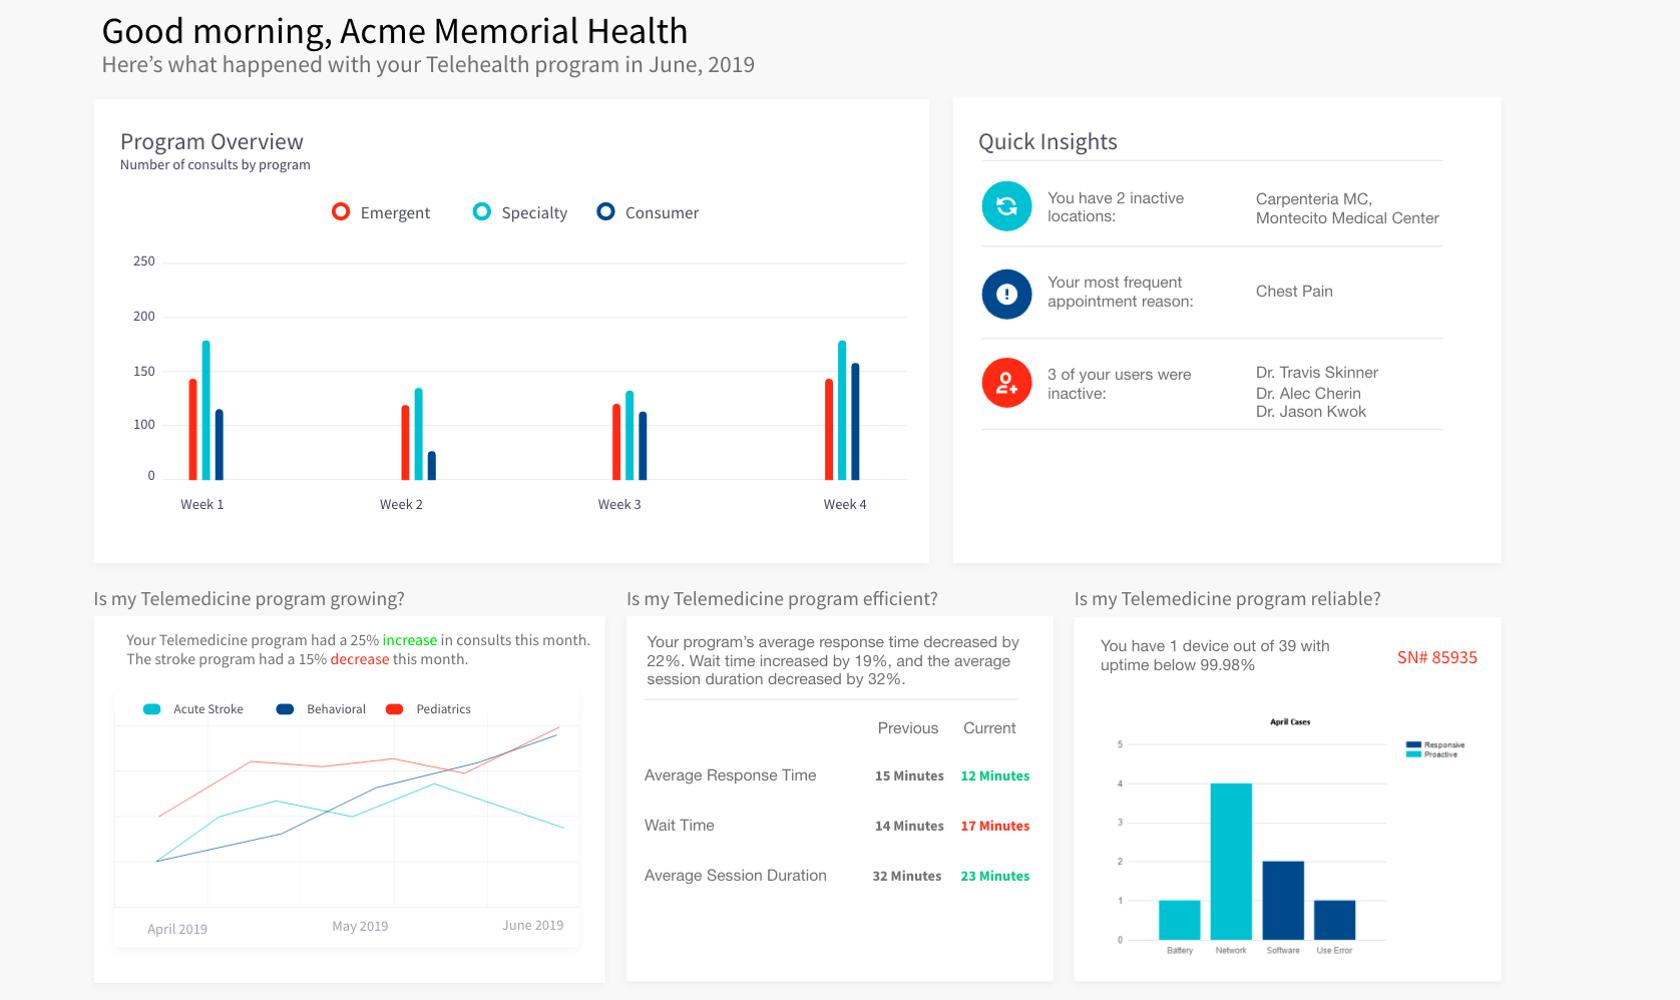 Dashboard design best practice with well laid out silos of information and good information flow